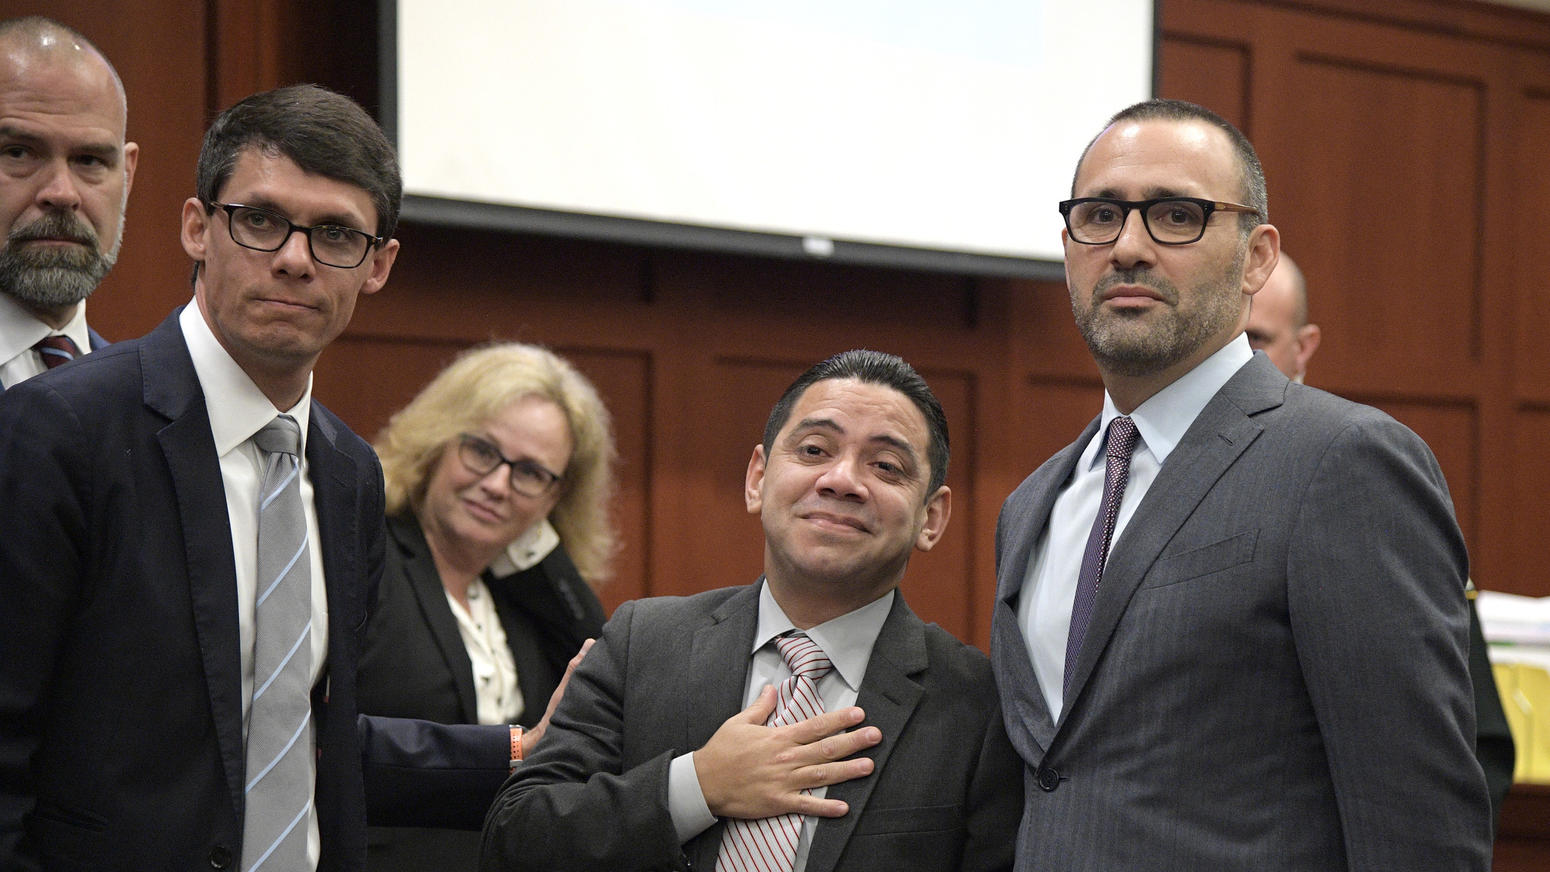 Clemente Aguirre and his attorney Josh Dubin (right) the day he was exonerated of murder in November 2018. (Image: Phelan Ebanhack)